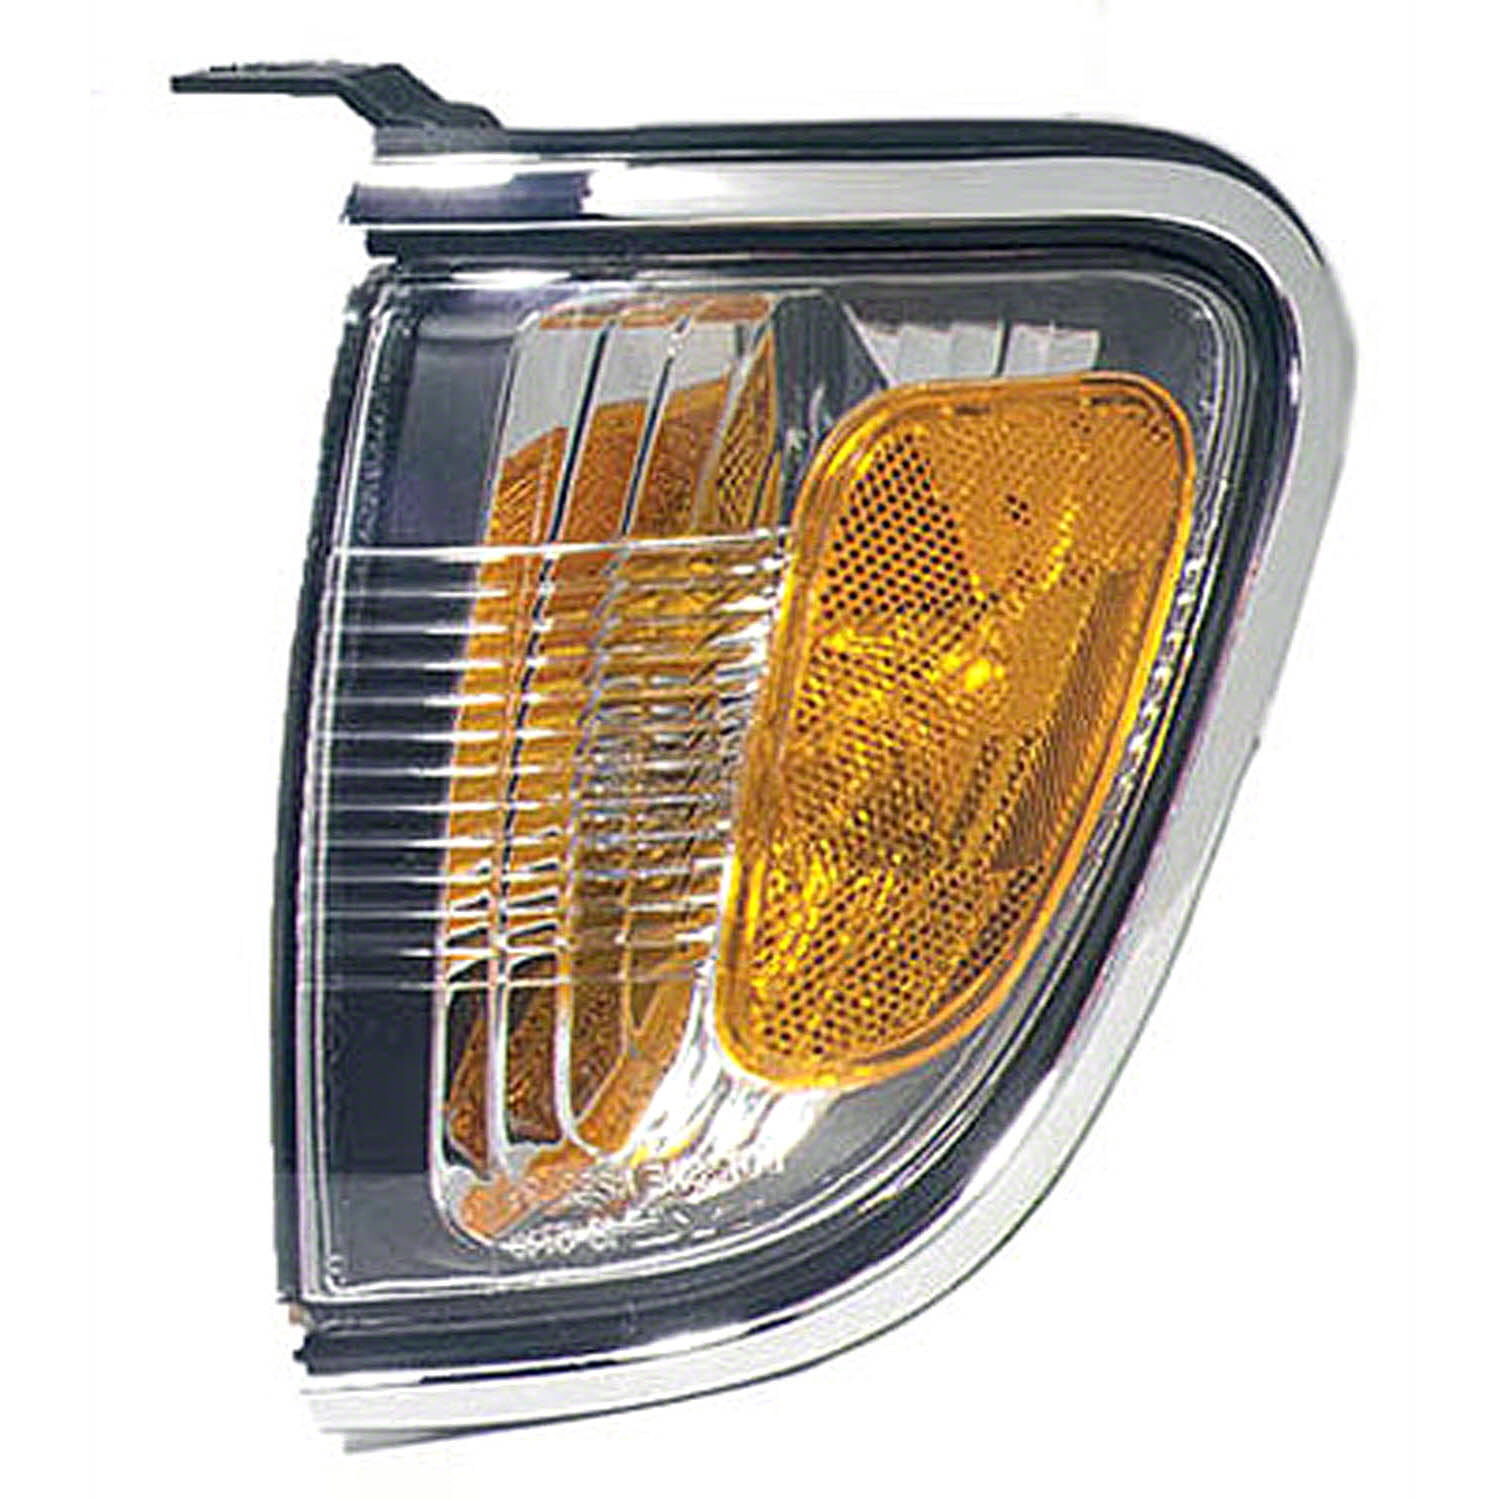 Clear & Amber Lens w/Chrome Trim 8162004080 TO2520161 For Toyota Tacoma Corner Light 2001 02 03 2004 Driver Side Park Lamp 